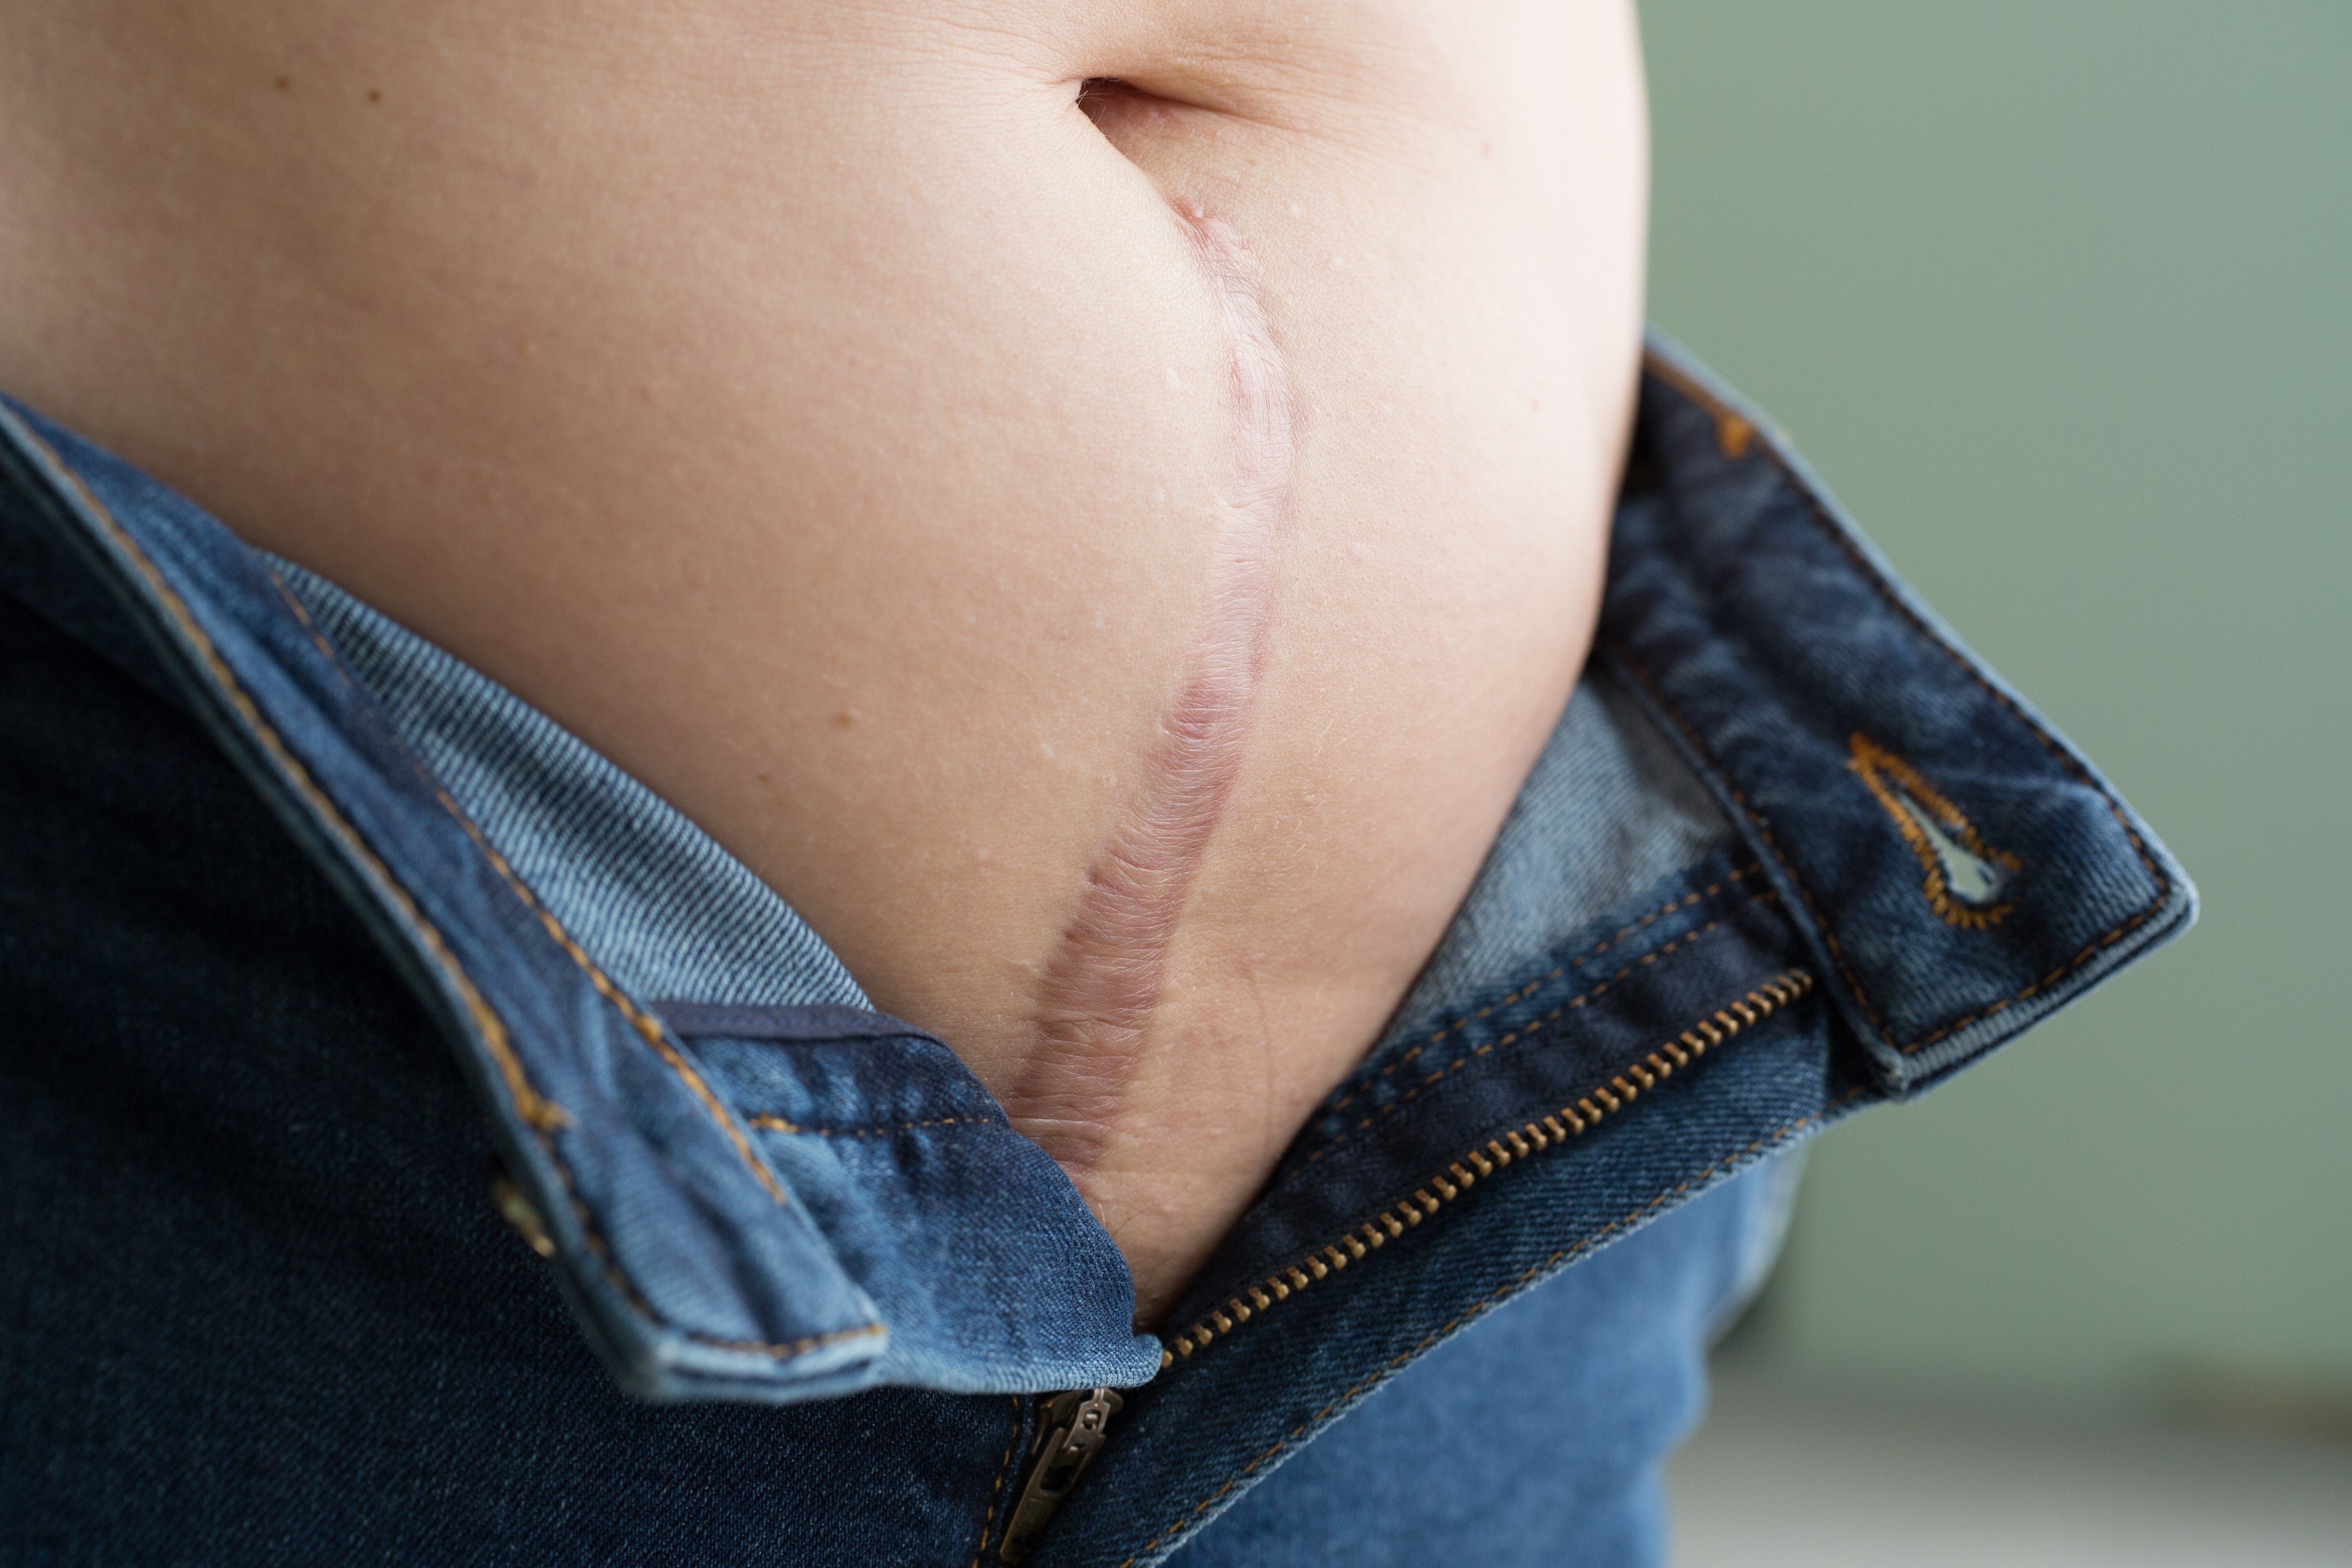 The writer wanted to avoid a hysterectomy scar like this. Photo: Getty Images